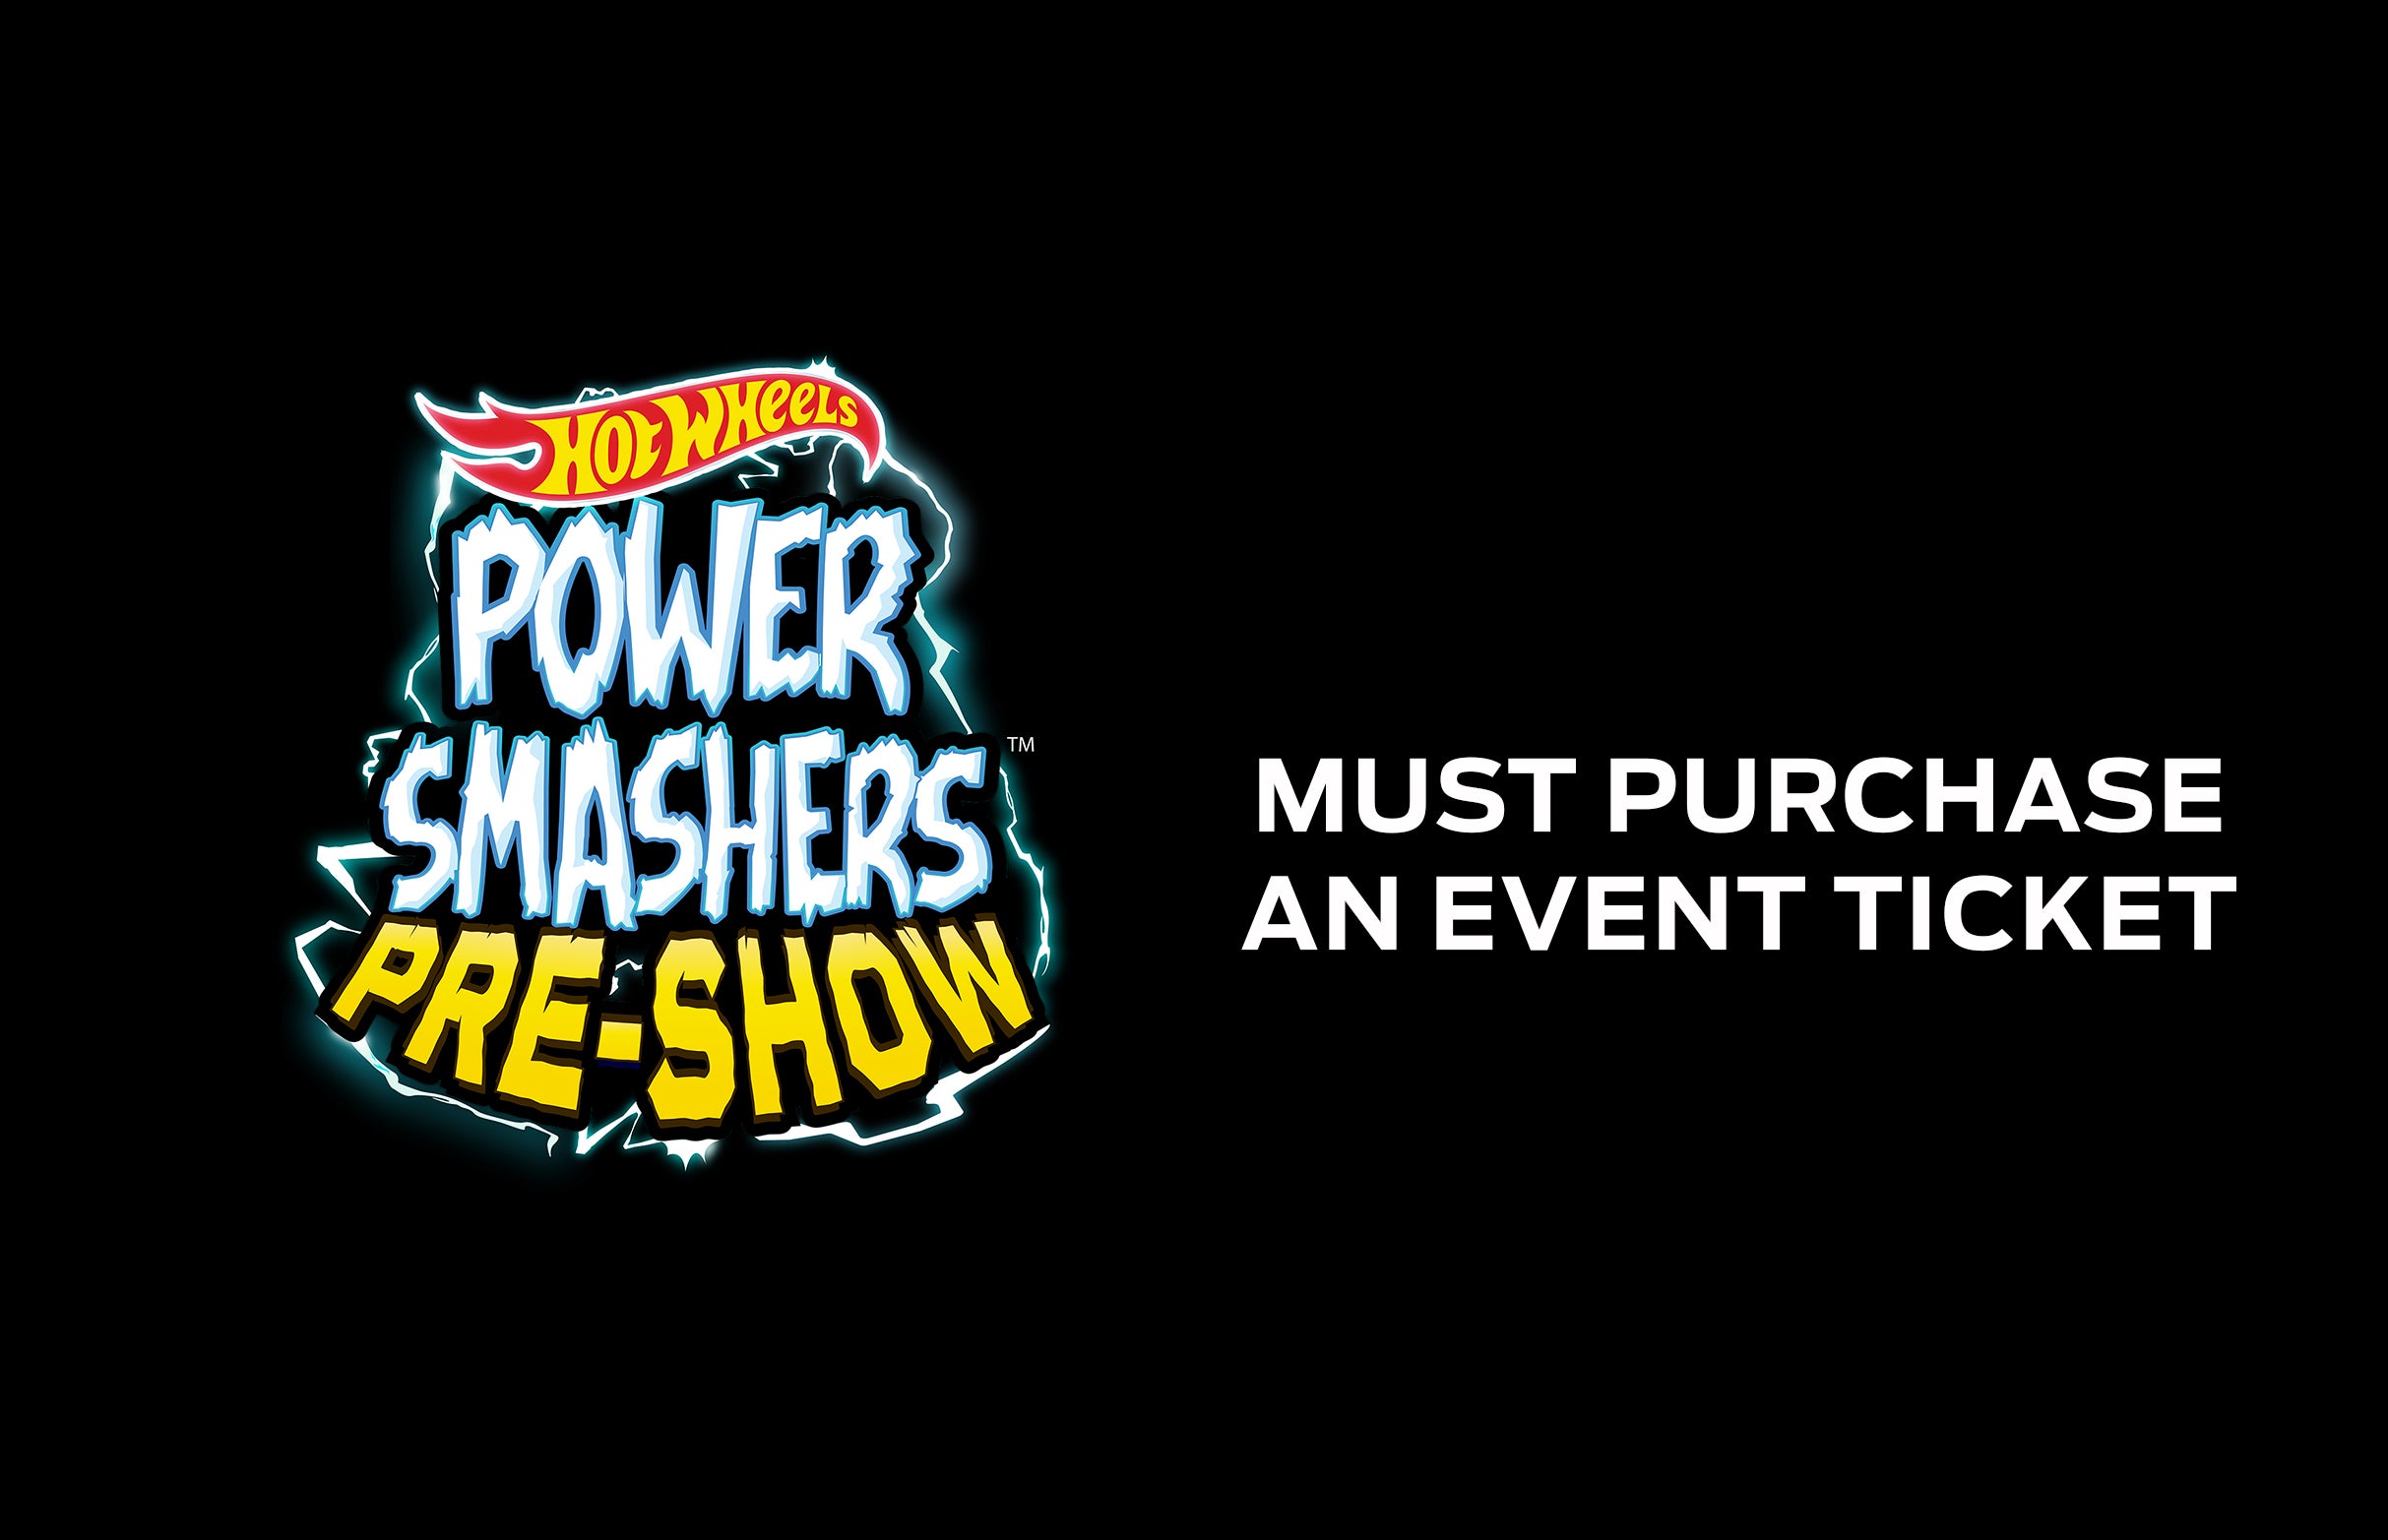 Hot Wheels Power Smashers Pre-Show starts at 10am in Indianapolis promo photo for Internet presale offer code